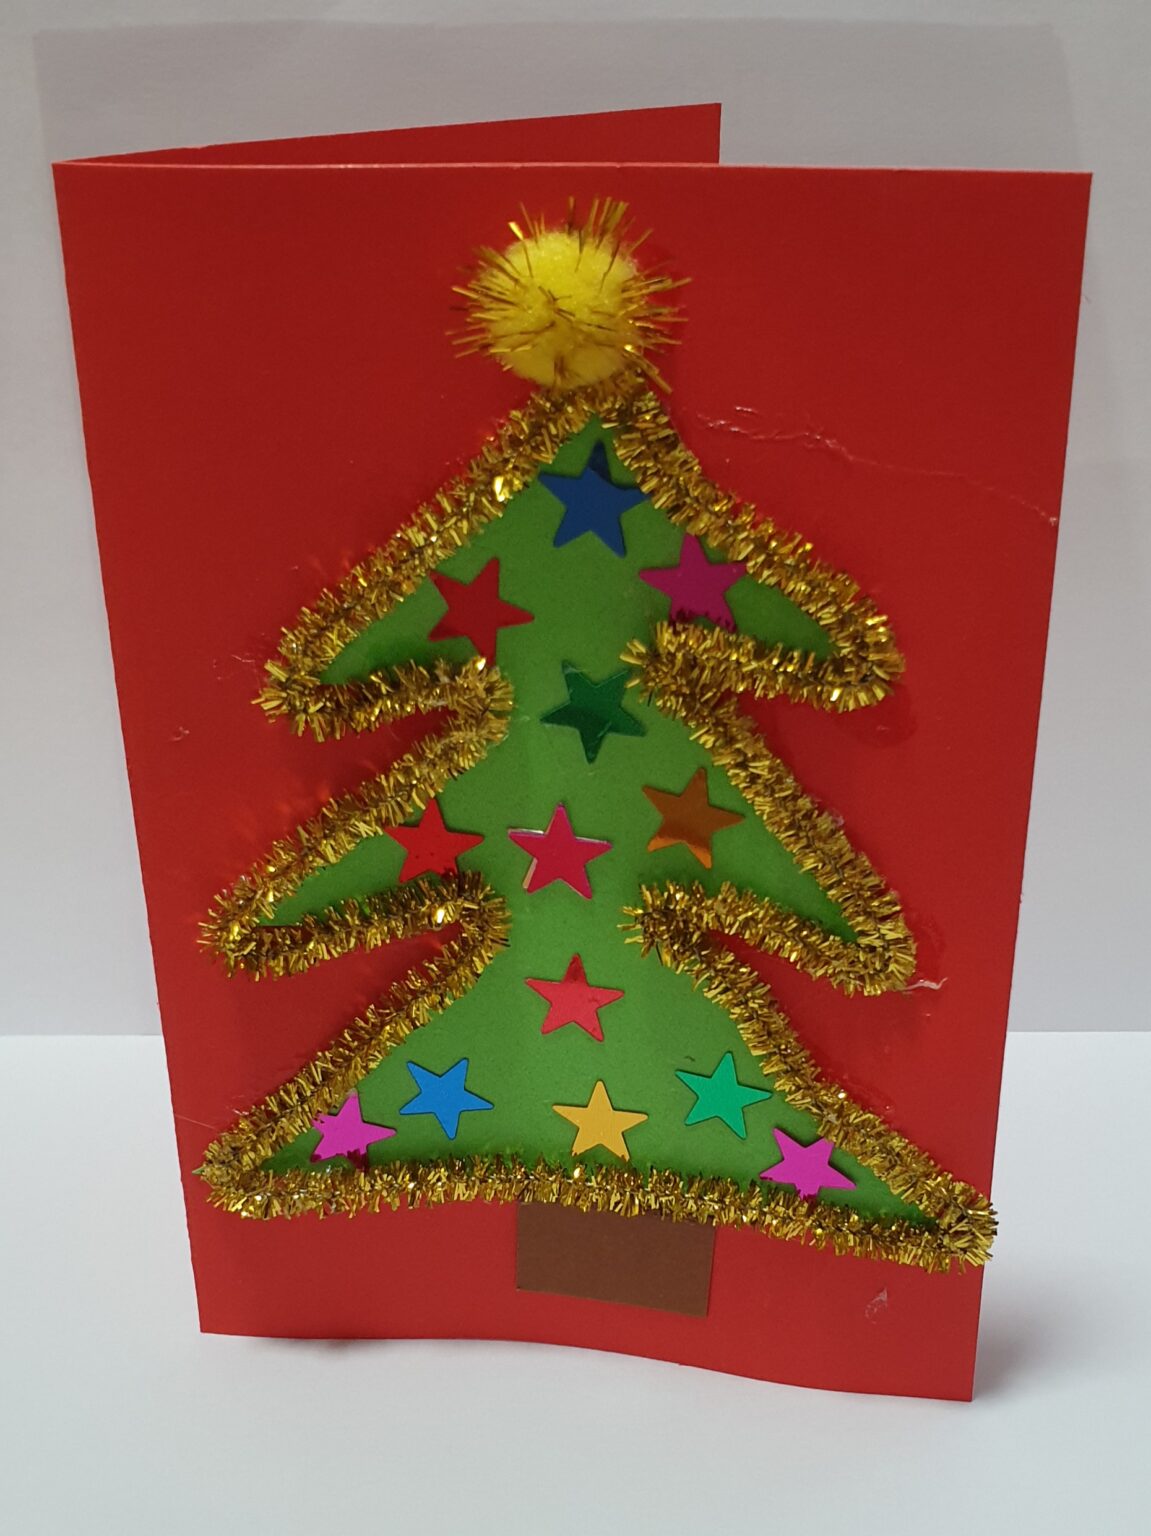 Make a Christmas Tree Card | Creative Art and Craft for Children